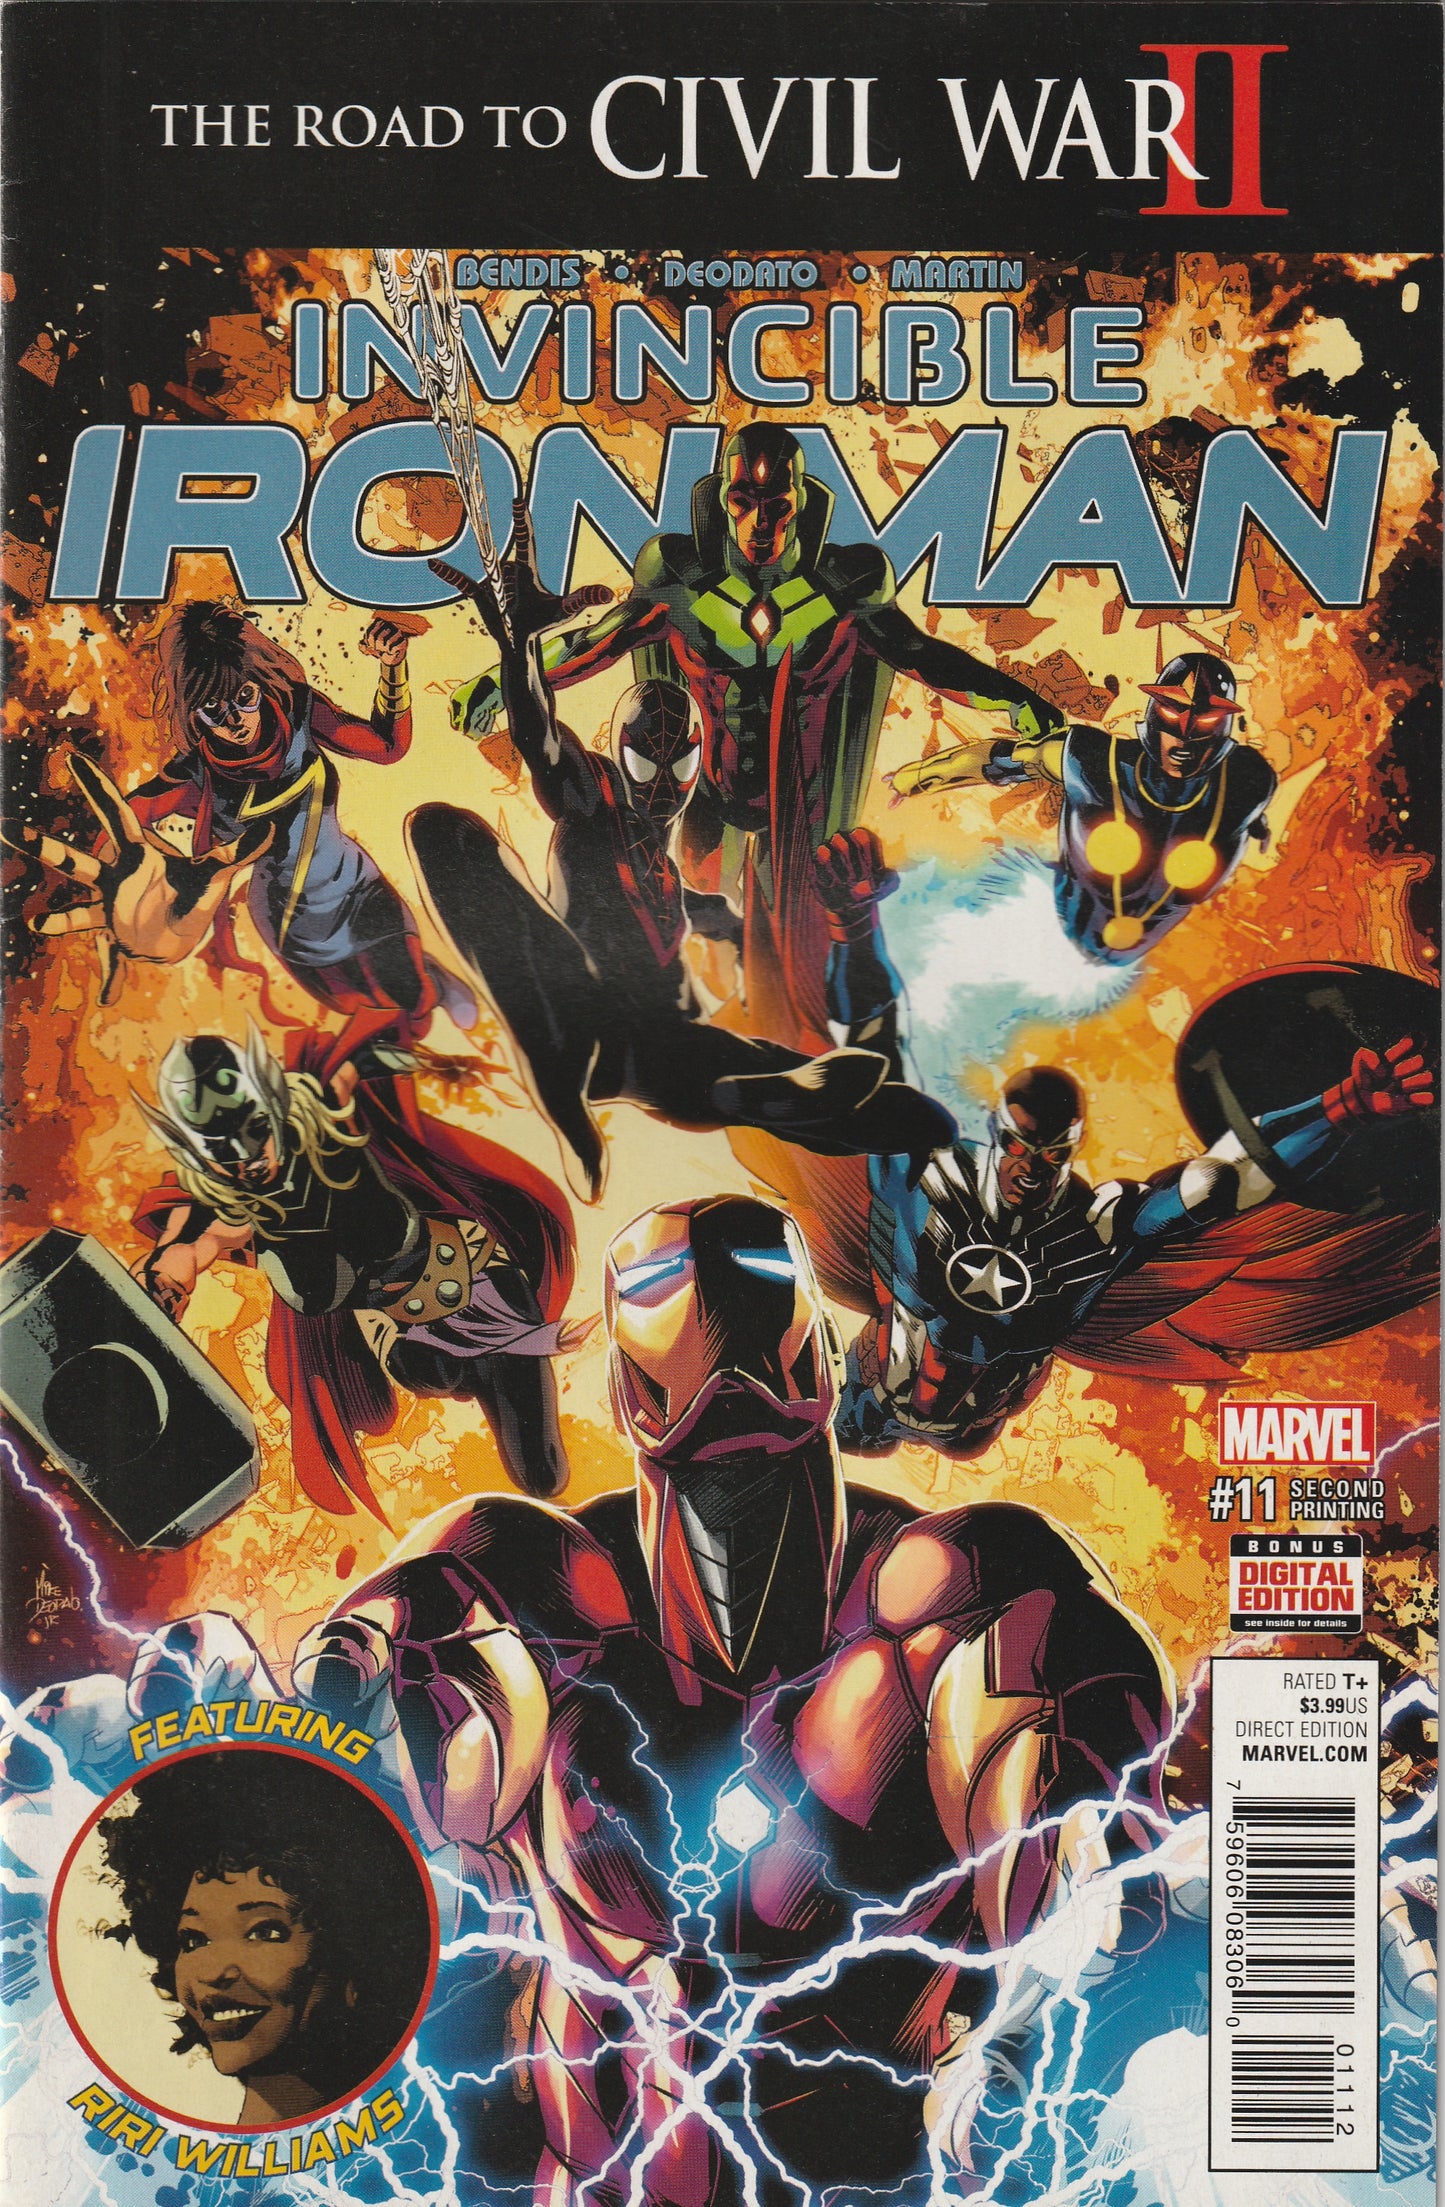 Invincible Iron Man #11 (2016) - 2nd Print Mike Deodato Variant Cover